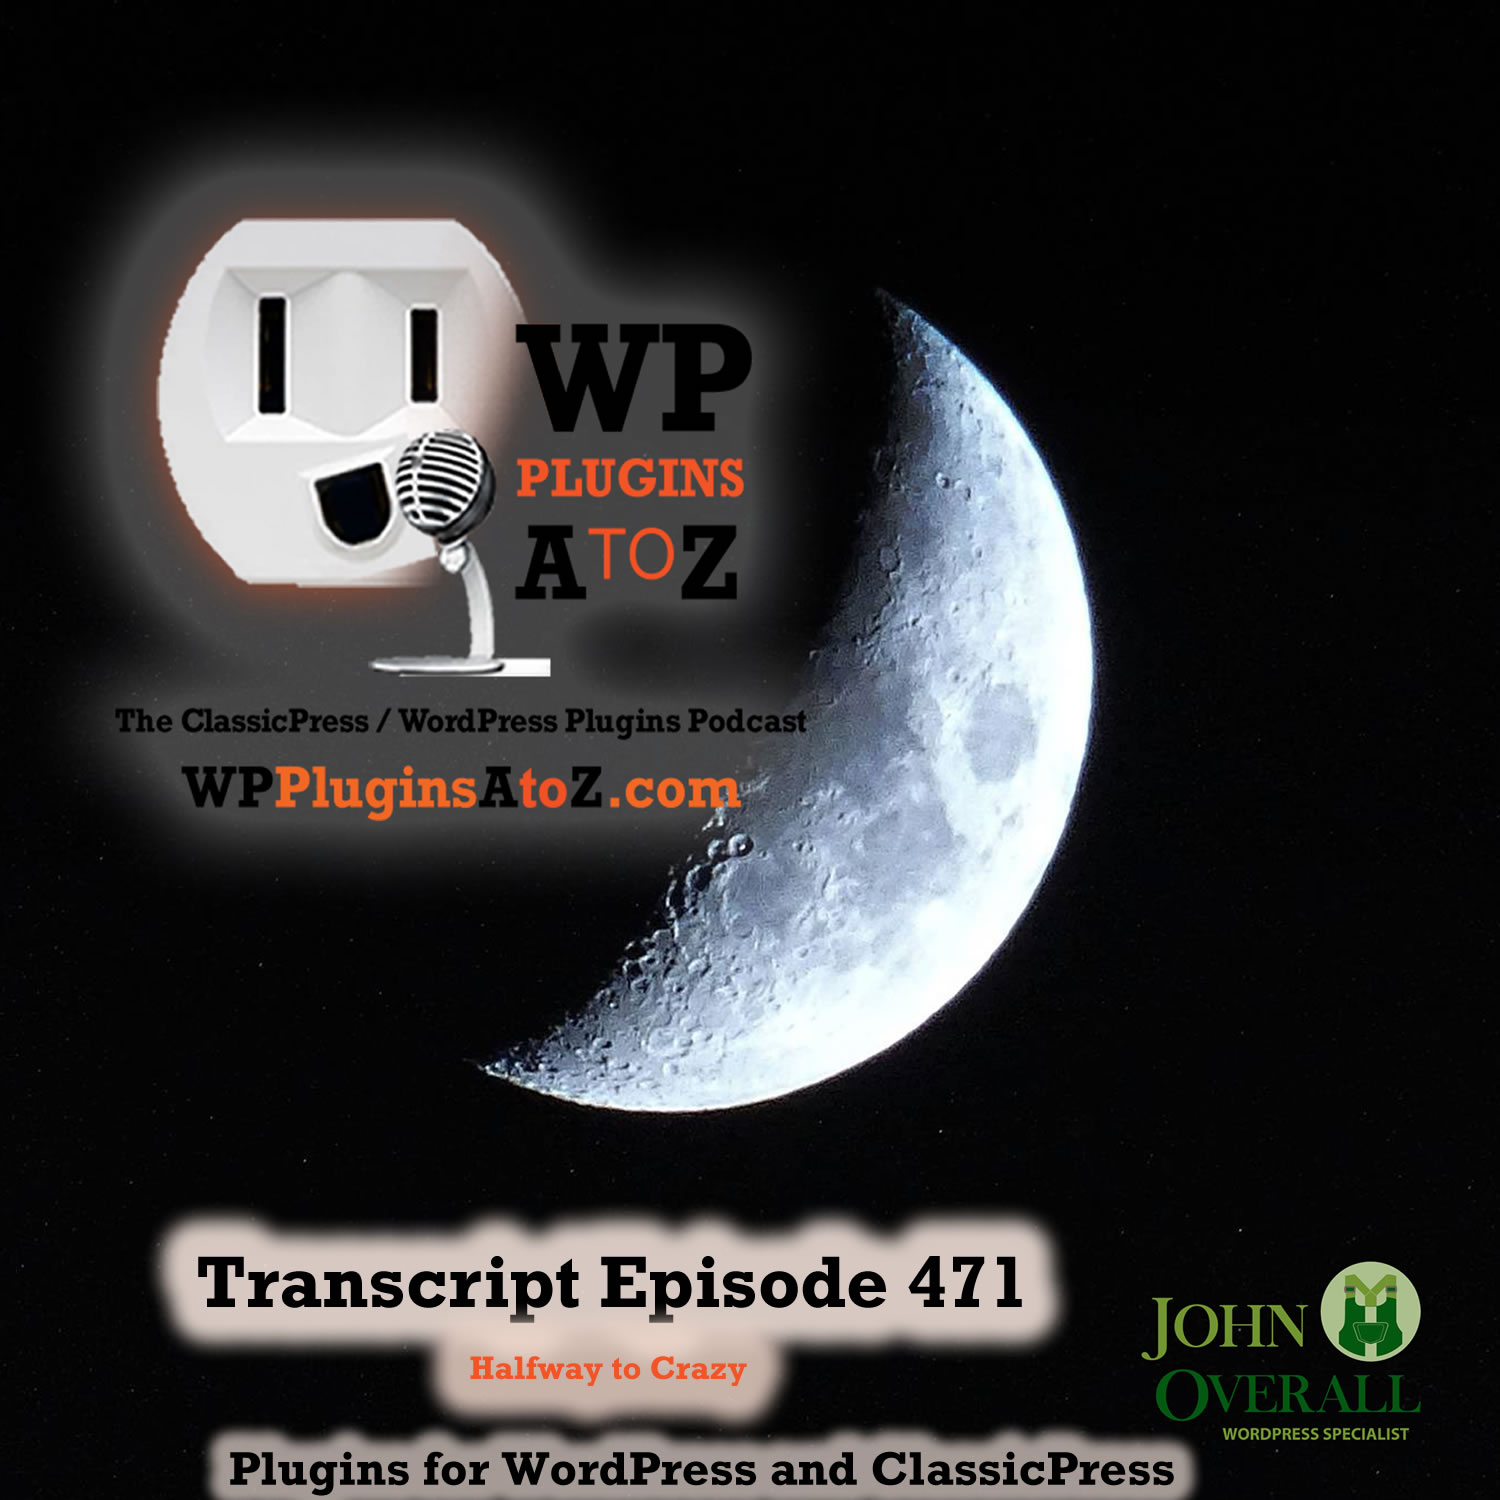 It's Episode 471 with plugins for Quizzing the Crazy, Knowing Your Age, Keeping Healthy Levels of Crazy, Crazy Security, Custom Content and ClassicPress Options. It's all coming up on WordPress Plugins A-Z!